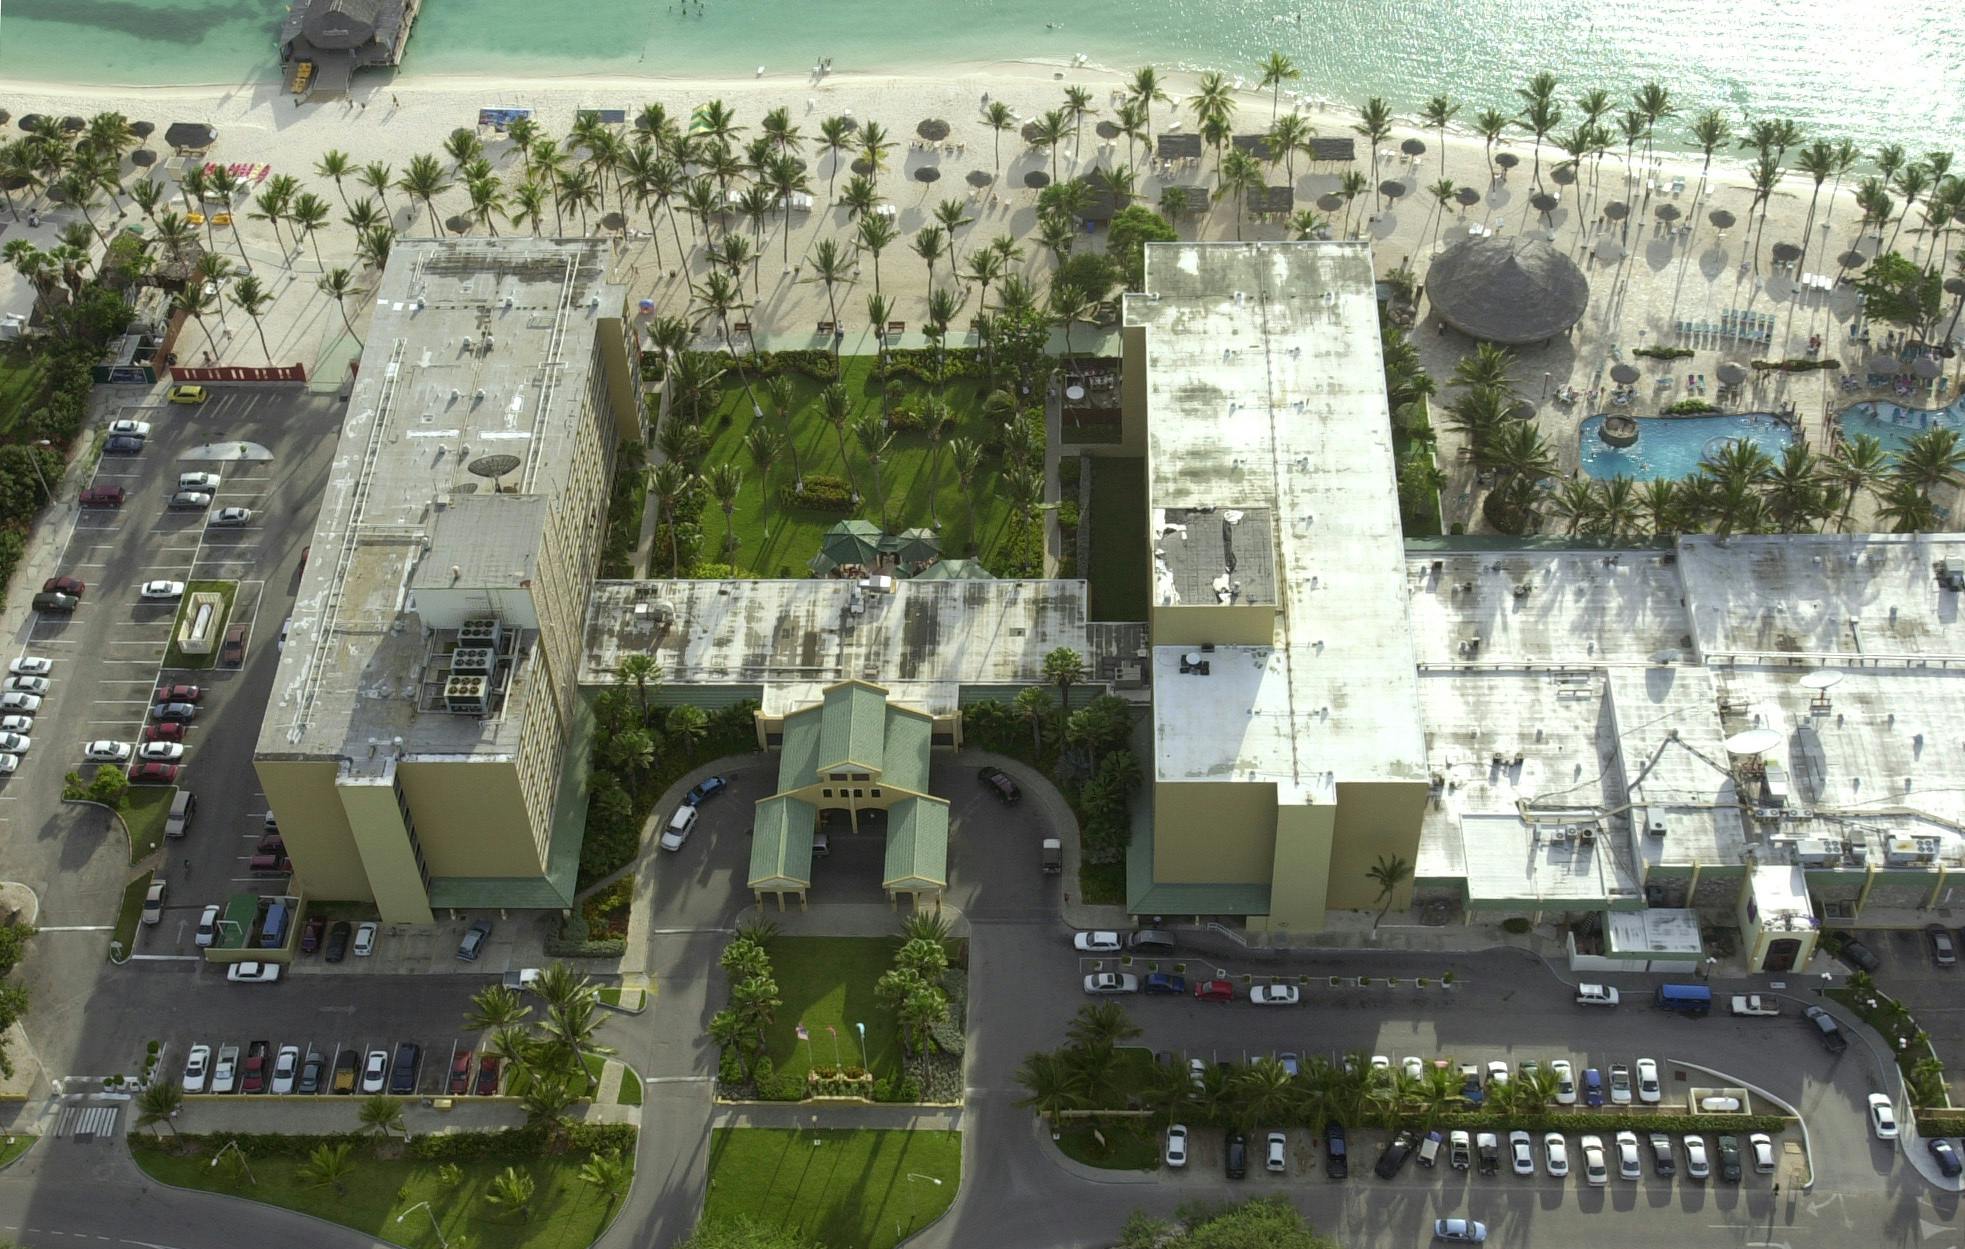 The Holiday Inn hotel is seen along Palm Beach in Aruba, Monday, June 13, 2005, where missing Alabama high school graduate Natalee Holloway stayed before she disappeared on May 30, 2005, while on a graduation trip to this Dutch Caribbean island. (AP Photo/Leslie Mazoch)